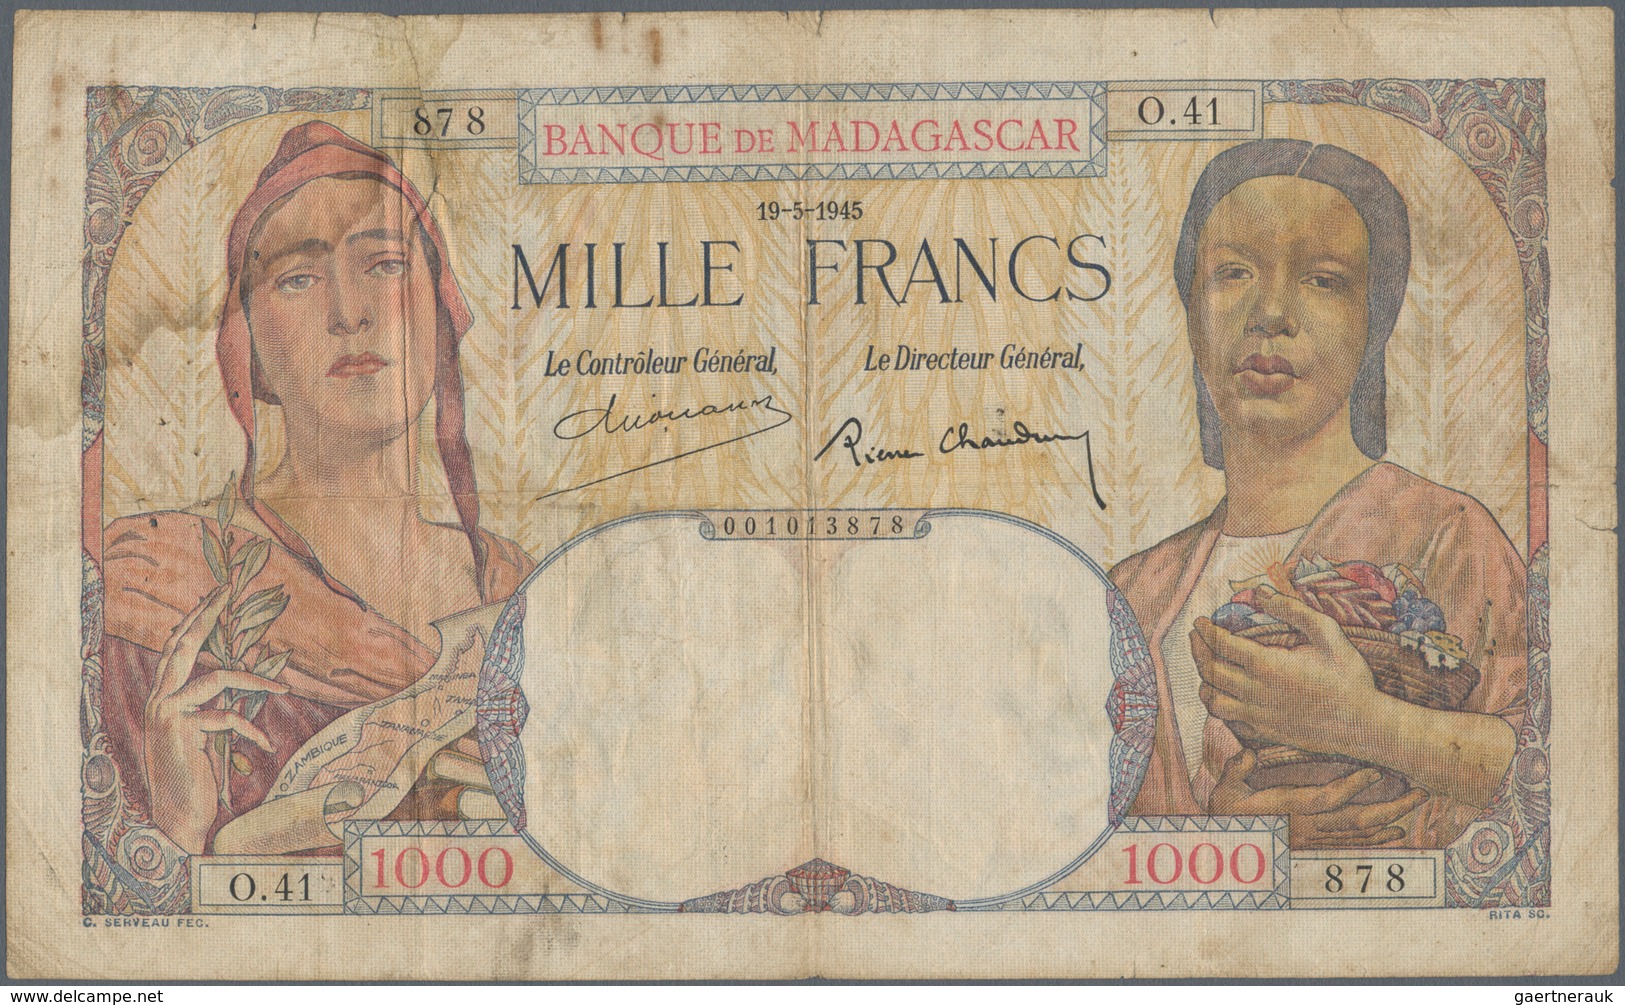 Madagascar: 1000 Francs 1945 P. 41, Used With Folds And Creases, Stain In Paper, One 1,5cm Tear At U - Madagascar